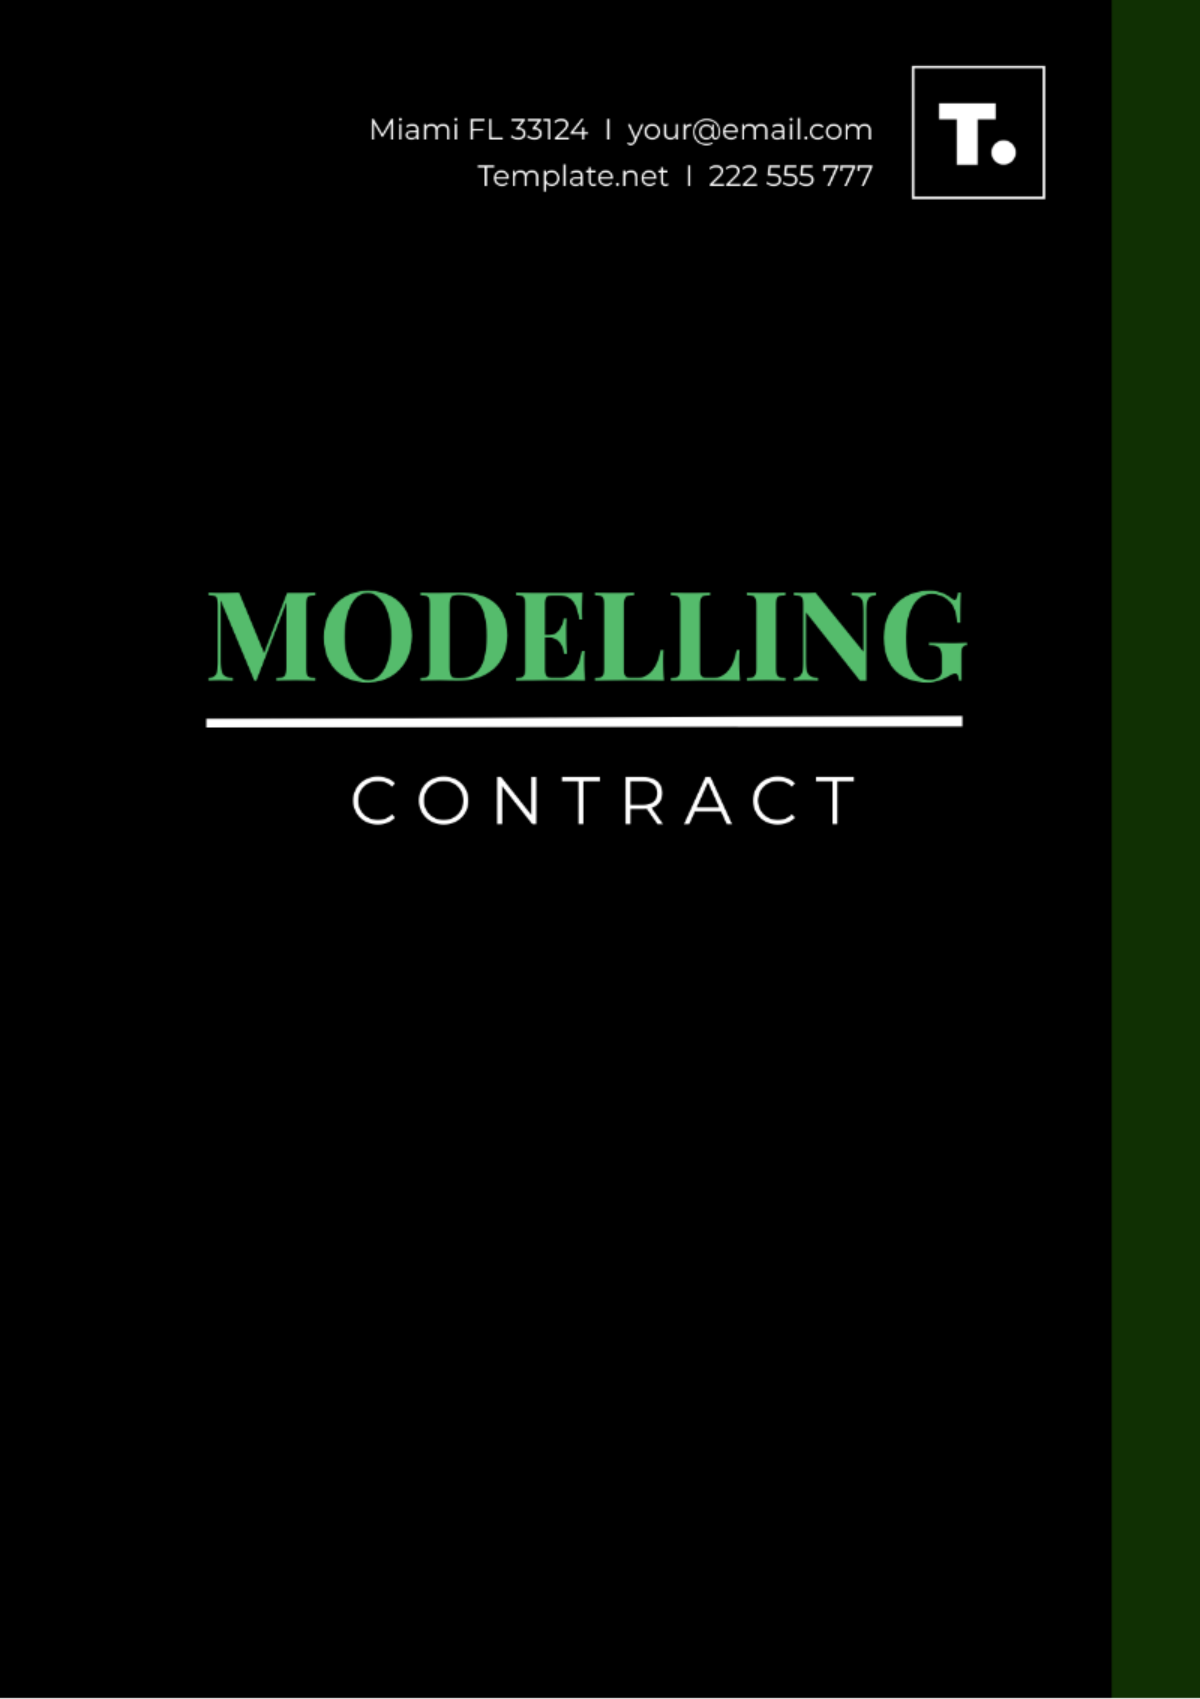 Modelling Contract Template